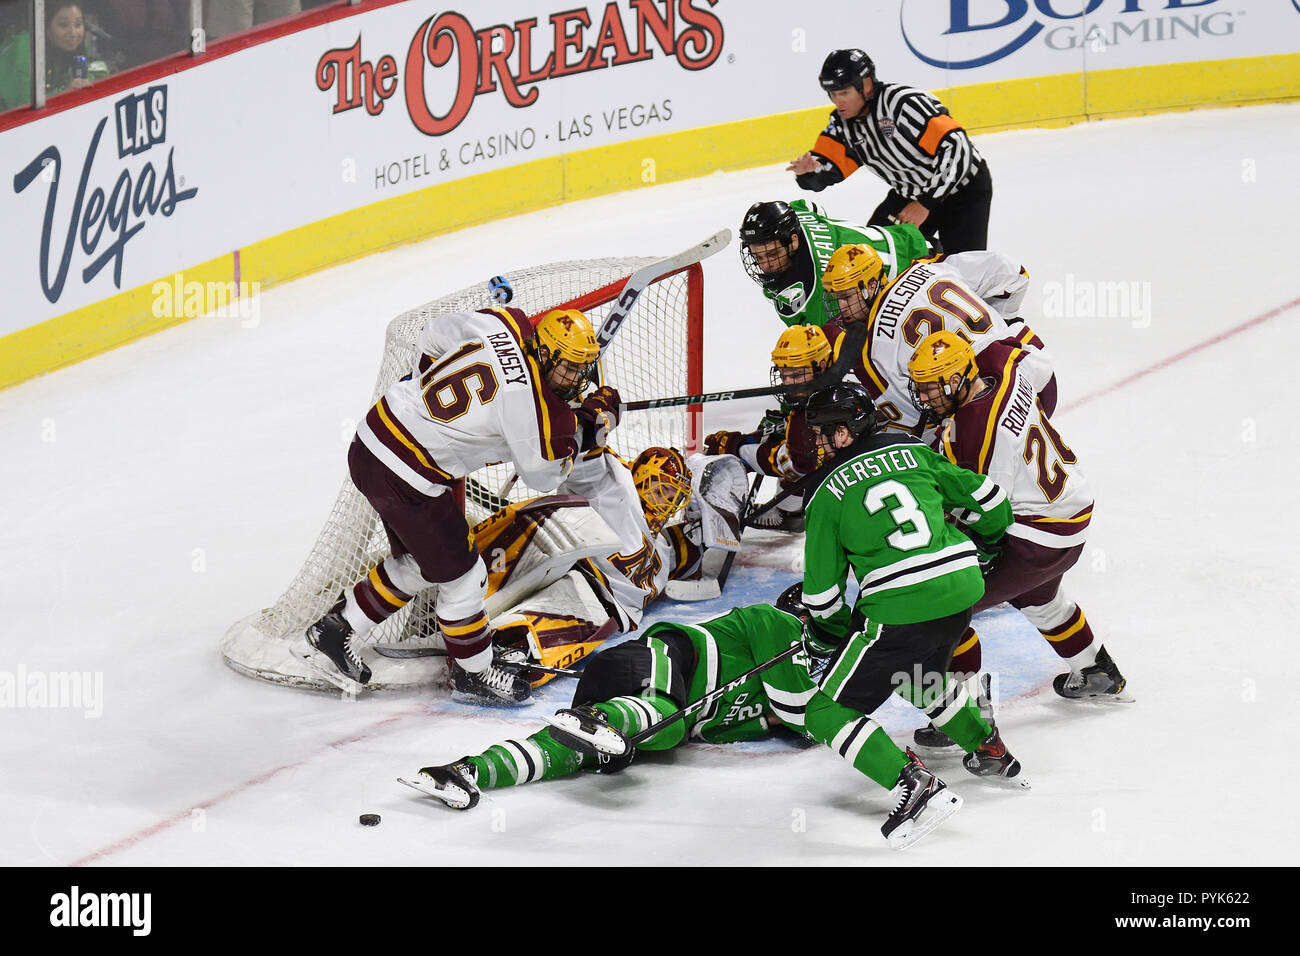 October 27, 2018 Players from both teams pile up in front of the goal during the NCAA men's US Hockey Hall of Fame game between the Minnesota Golden Gophers and the University of North Dakota Fighting Hawks at Orleans Arena in Las Vegas, NV. North Dakota defeated Minnesota 3 -1. Photo by Russell Hons/CSM Stock Photo